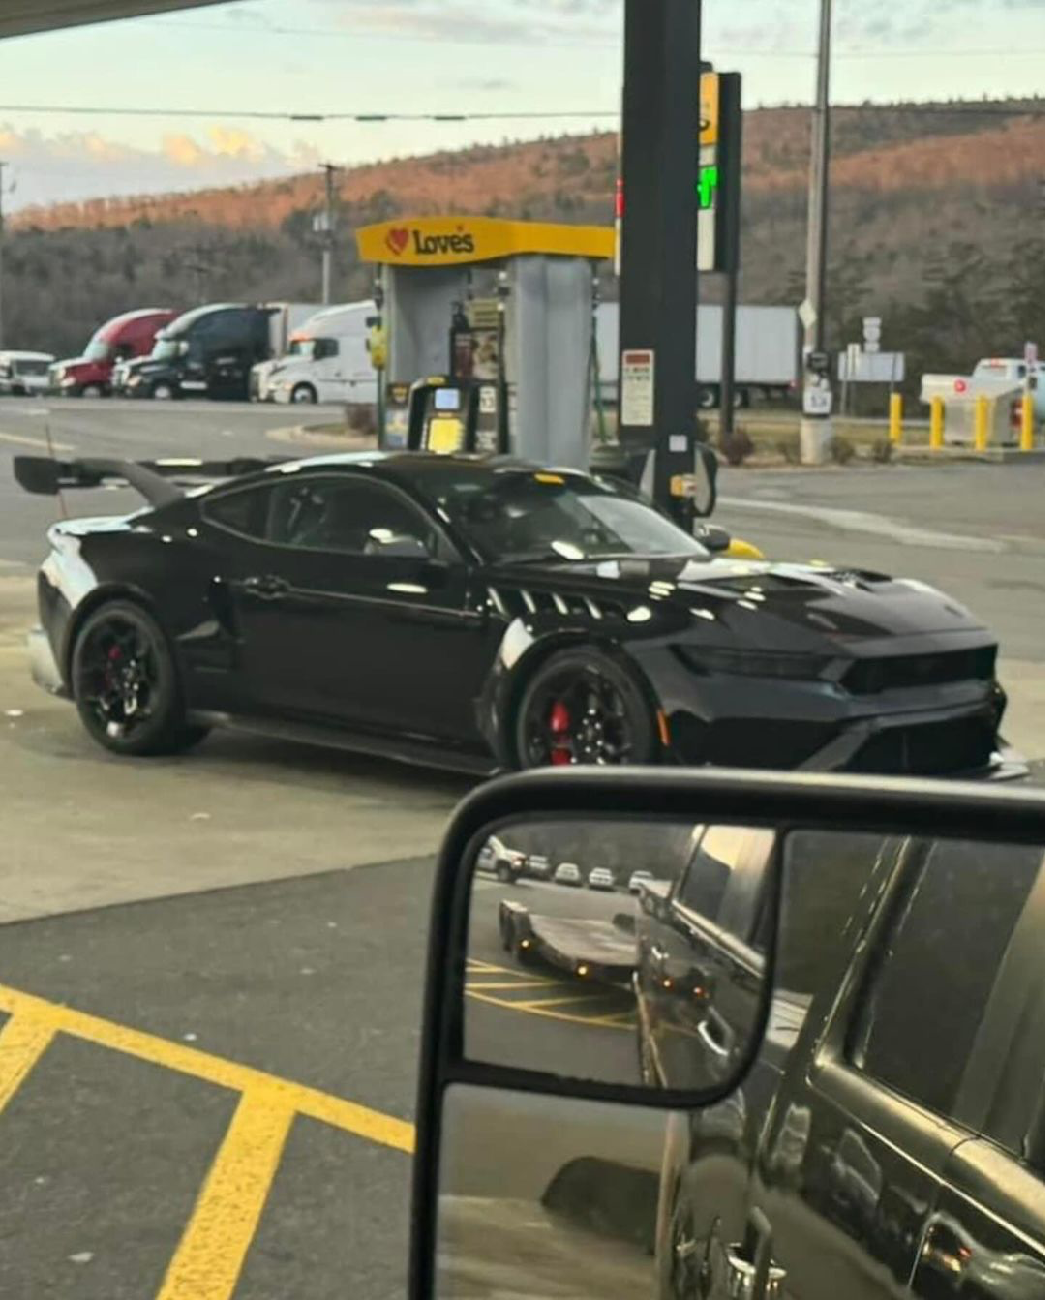 S650 Mustang Black Mustang GTD Spied at Public Gas Station mustang-gtd-spied-gas-station-3